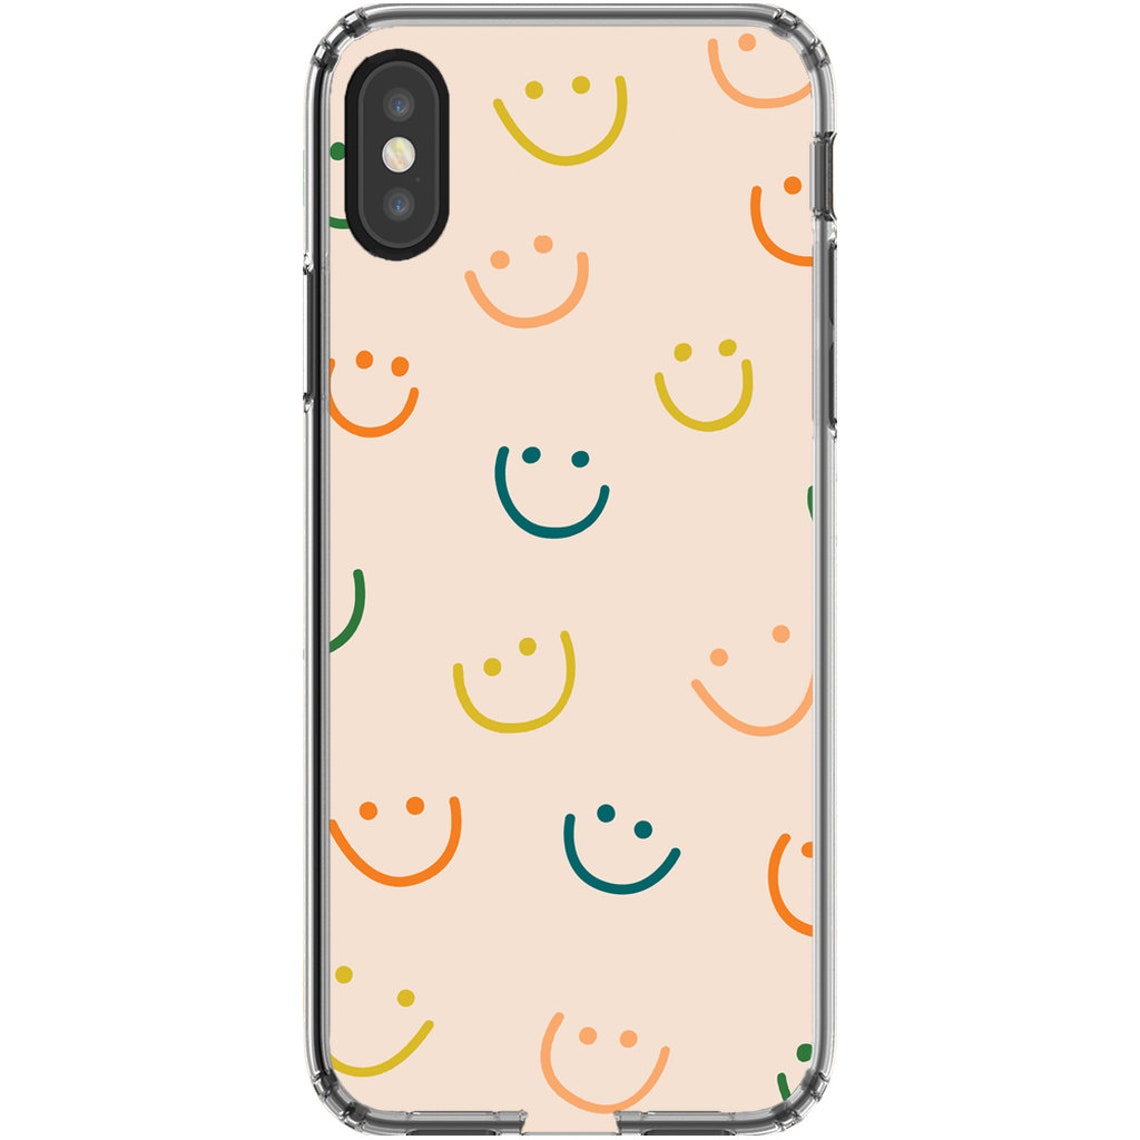 Smiley Faces /I.Phone Cases | Etsy